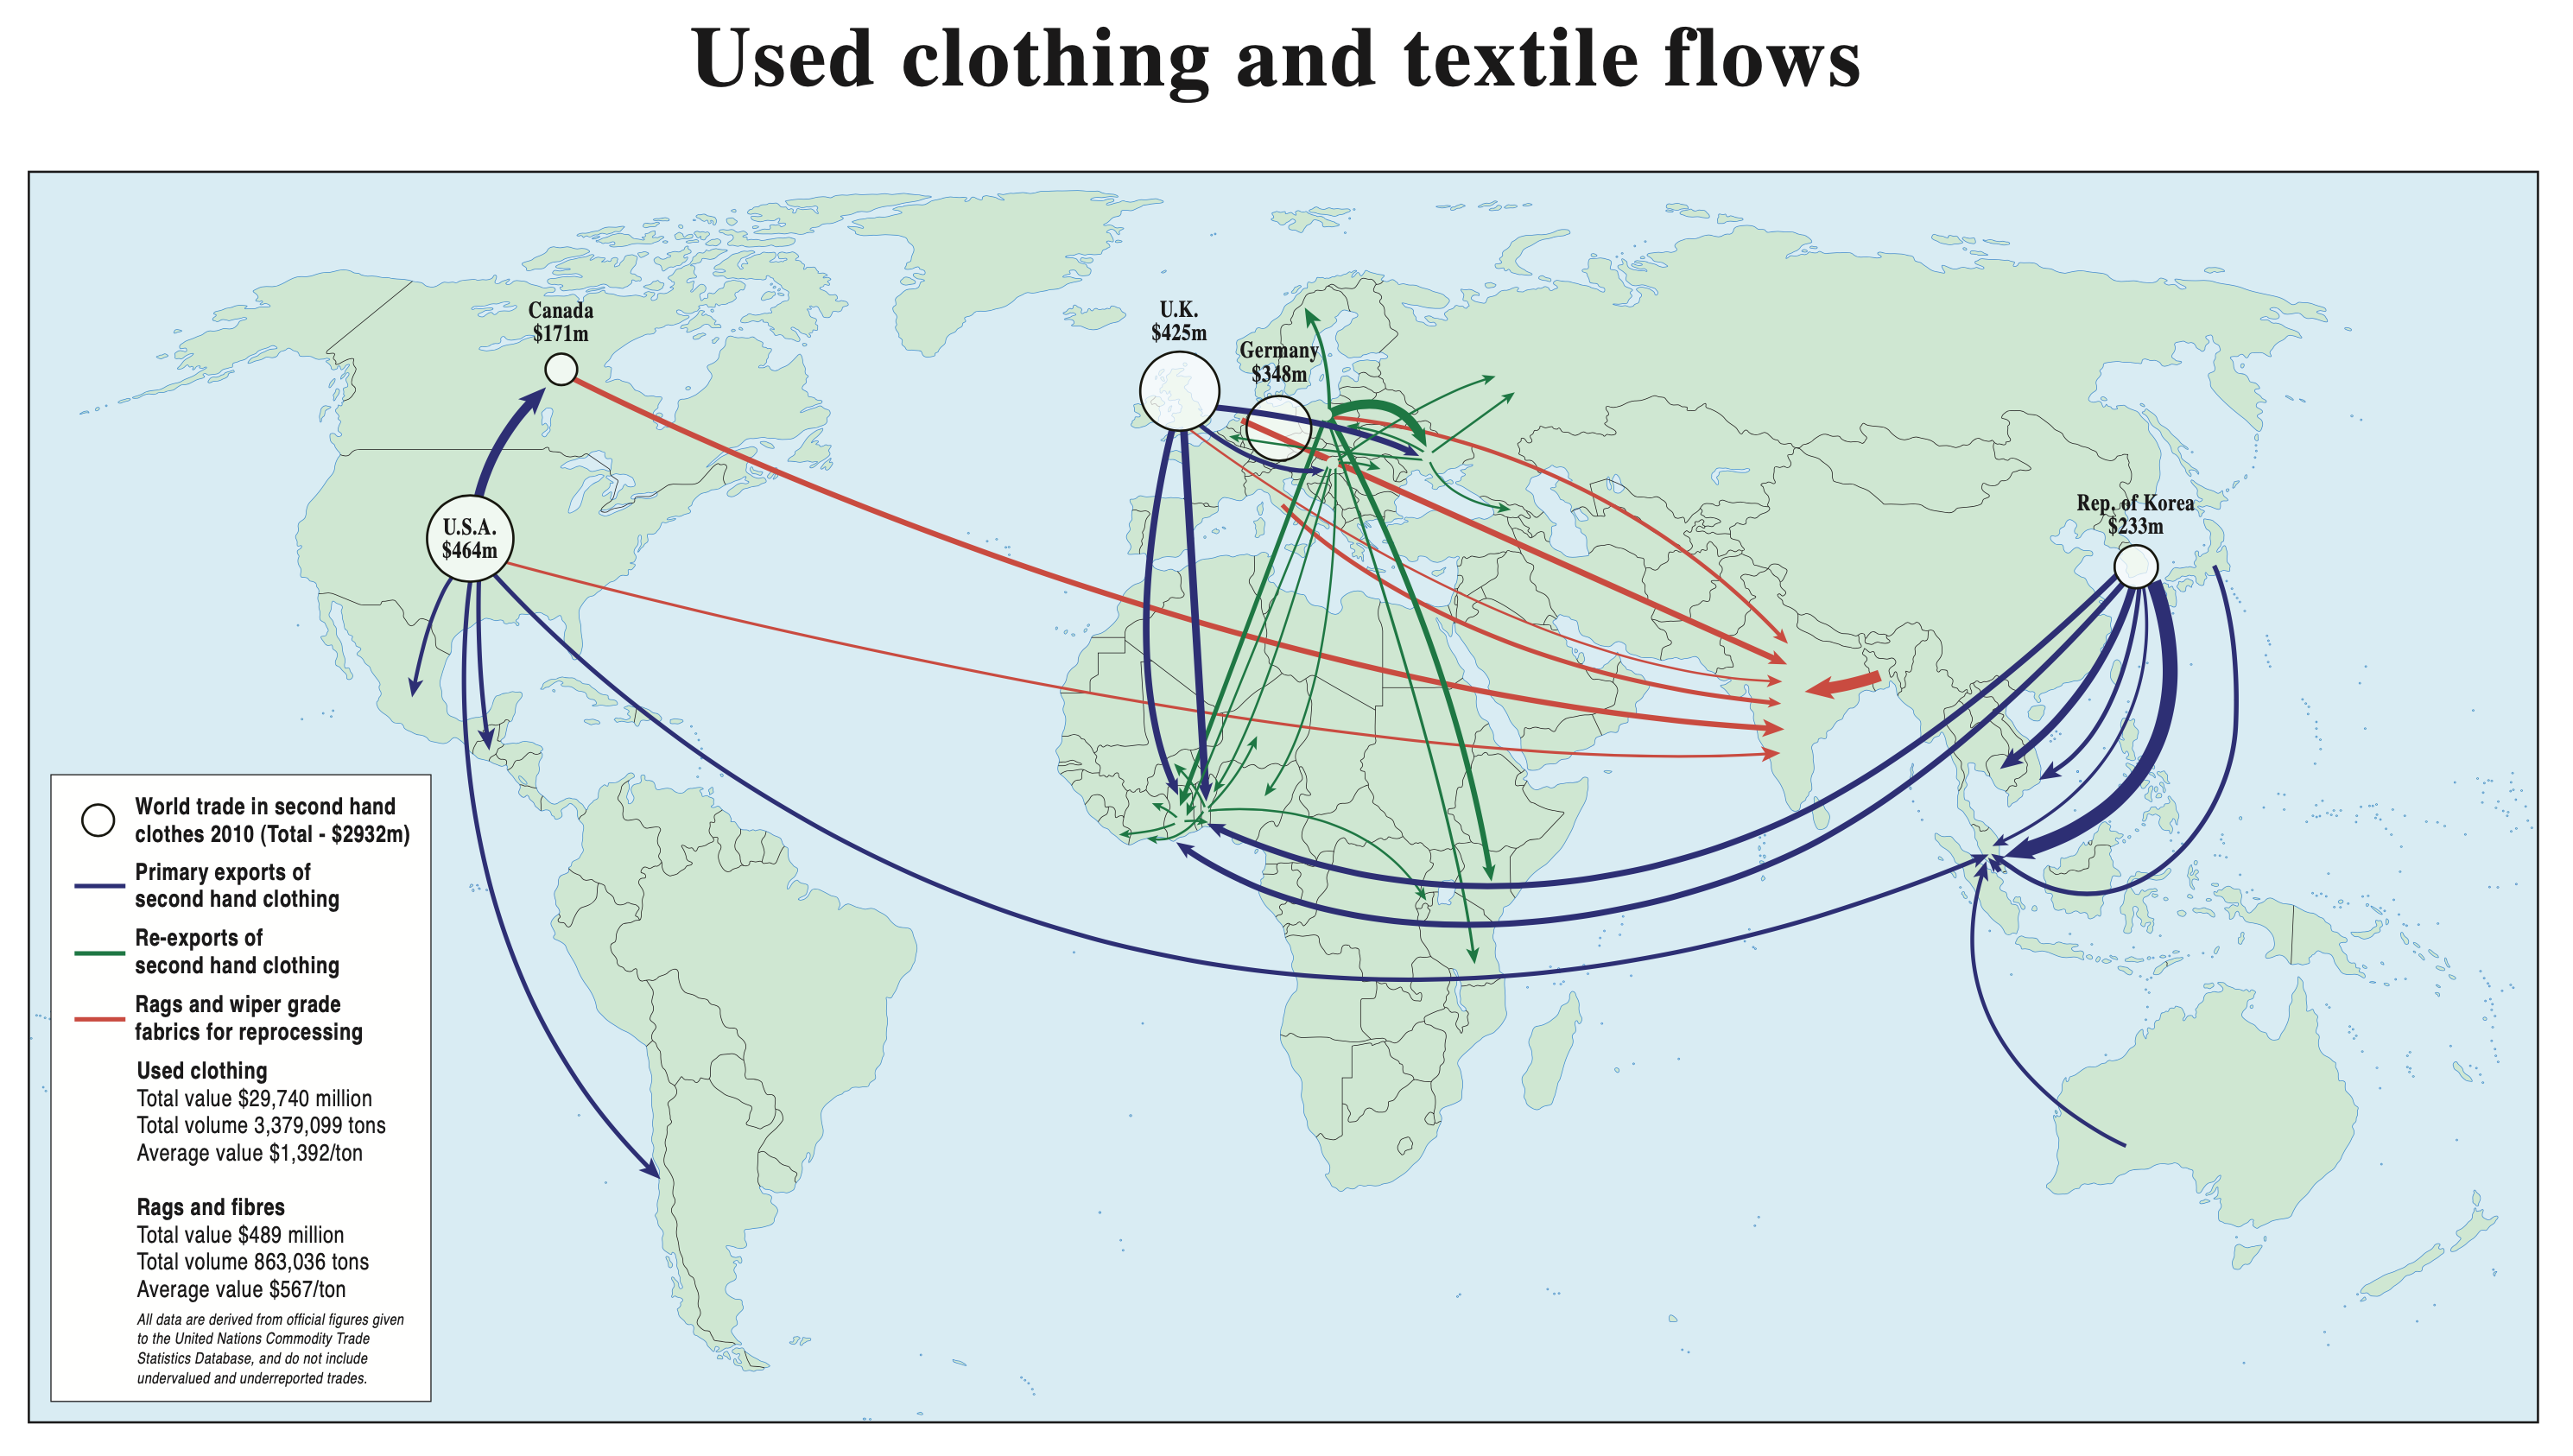 Map of global flows in used clothing and textiles